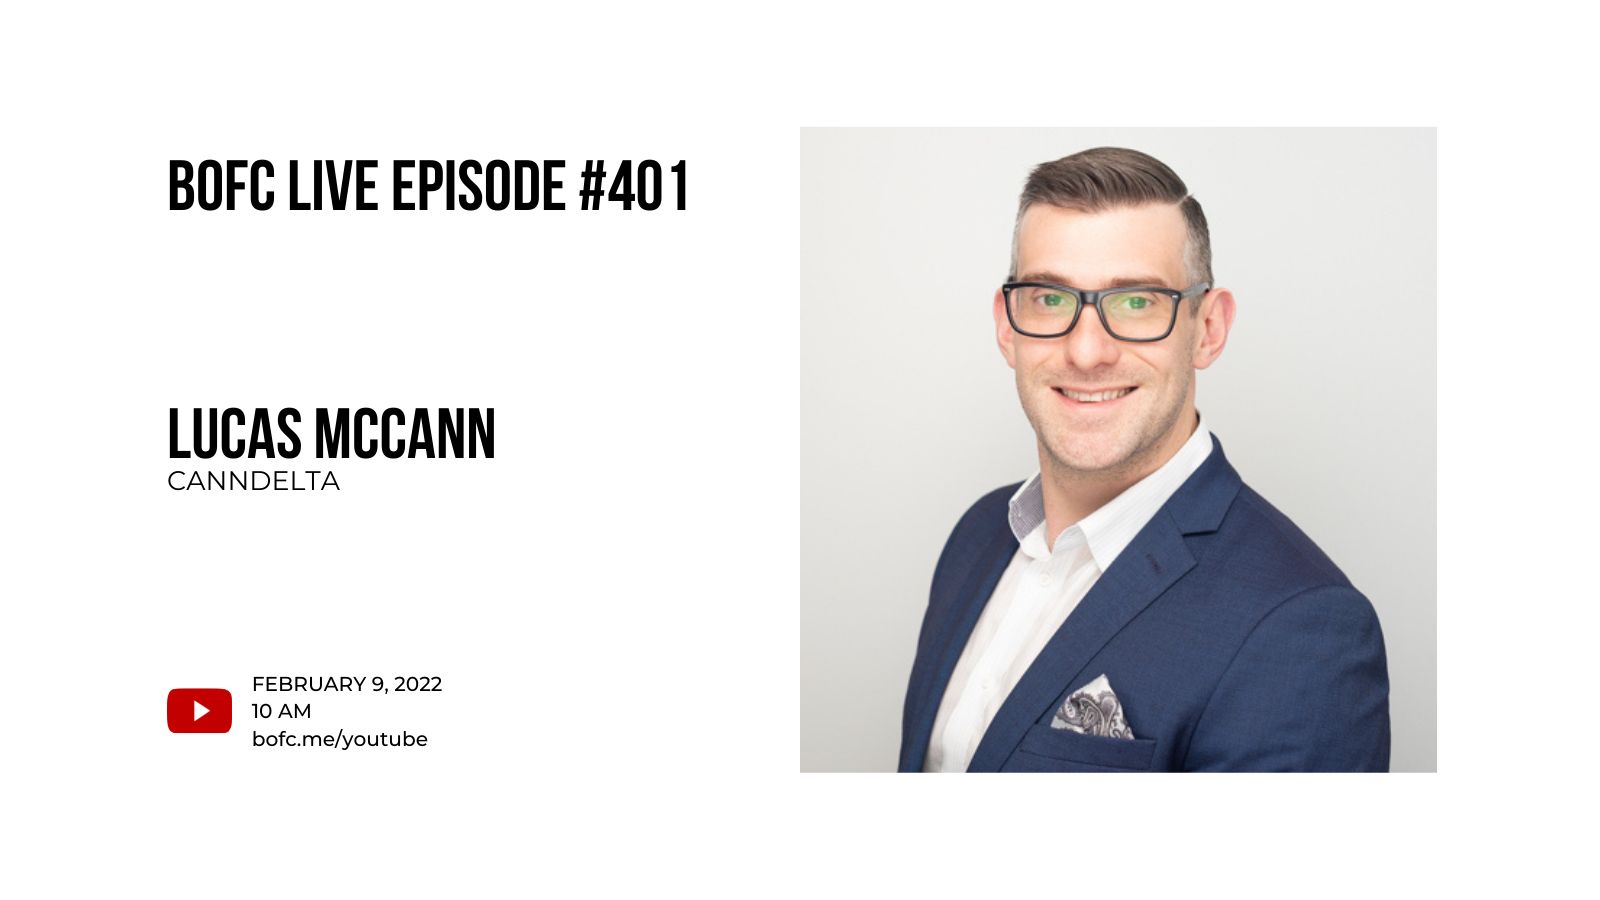 lucas mccann shares the latest cannabis news on regulations in ontario